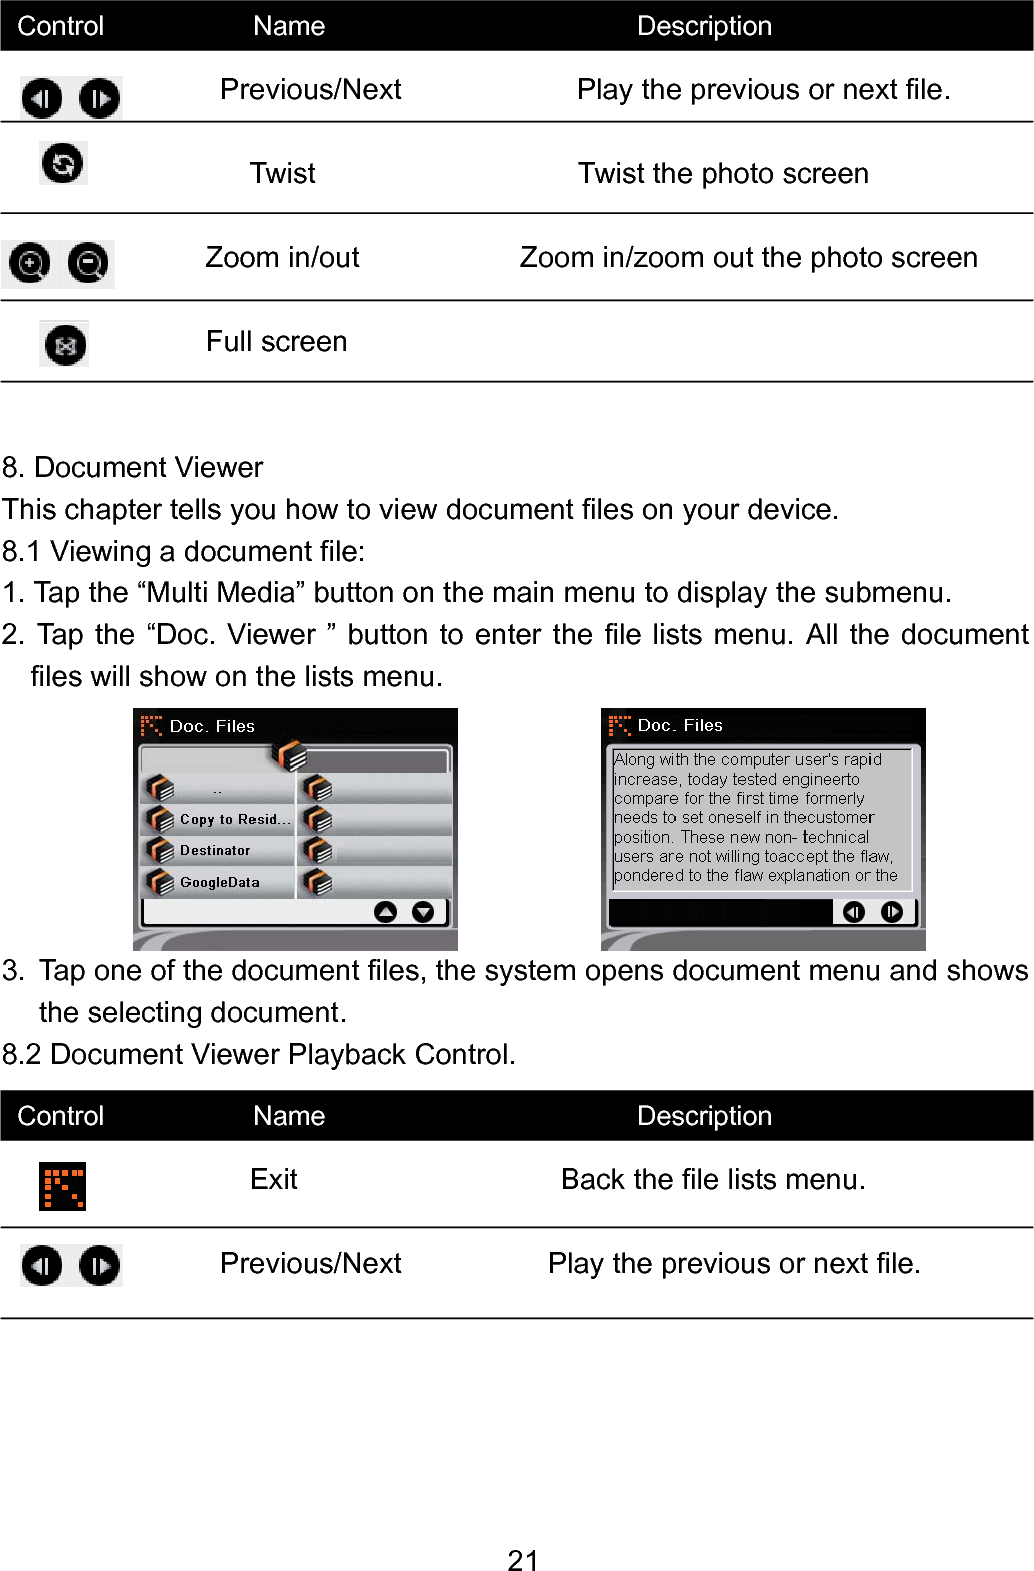  21                Previous/Next            Play the previous or next file.                Twist                  Twist the photo screen               Zoom in/out           Zoom in/zoom out the photo screen            Full screen     8. Document Viewer This chapter tells you how to view document files on your device. 8.1 Viewing a document file: 1. Tap the “Multi Media” button on the main menu to display the submenu. 2. Tap the “Doc. Viewer ” button to enter the file lists menu. All the document files will show on the lists menu.           3.  Tap one of the document files, the system opens document menu and shows the selecting document. 8.2 Document Viewer Playback Control.                 Exit                    Back the file lists menu.                Previous/Next          Play the previous or next file.      Control           Name                       Description Control           Name                       Description 